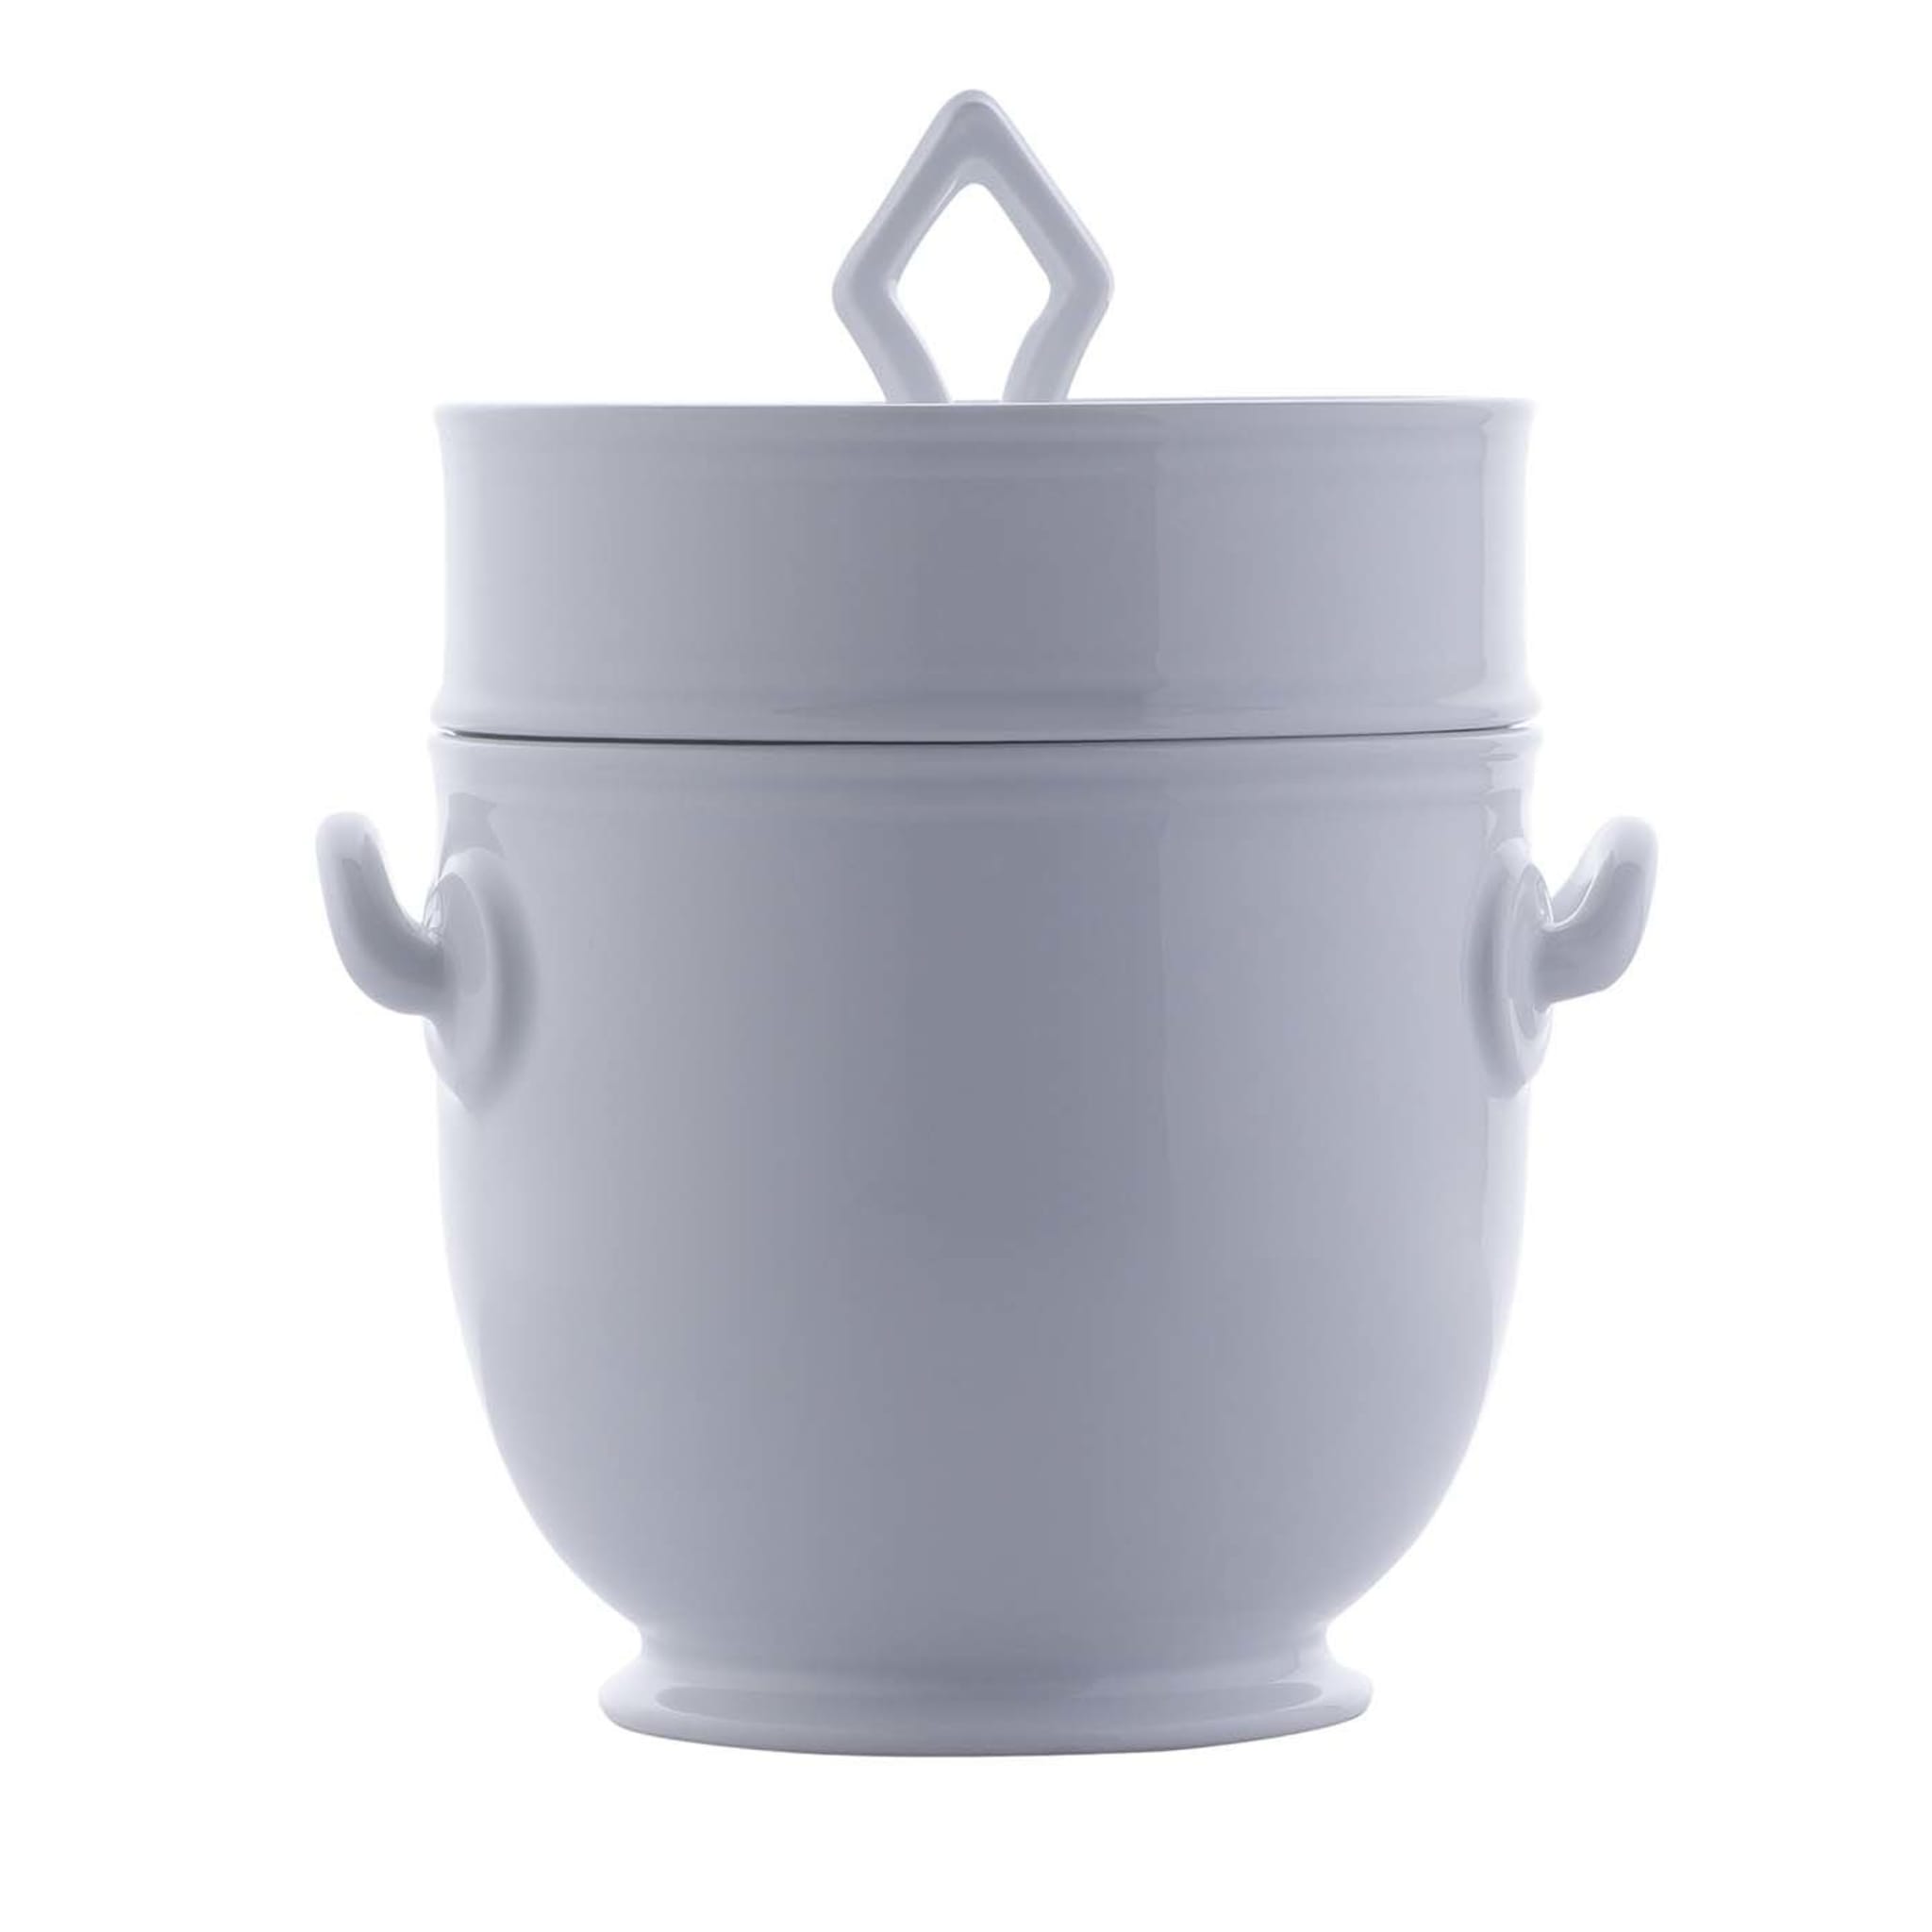 Large White Cooler/Ice Bucket with Bowl and Lid - Main view